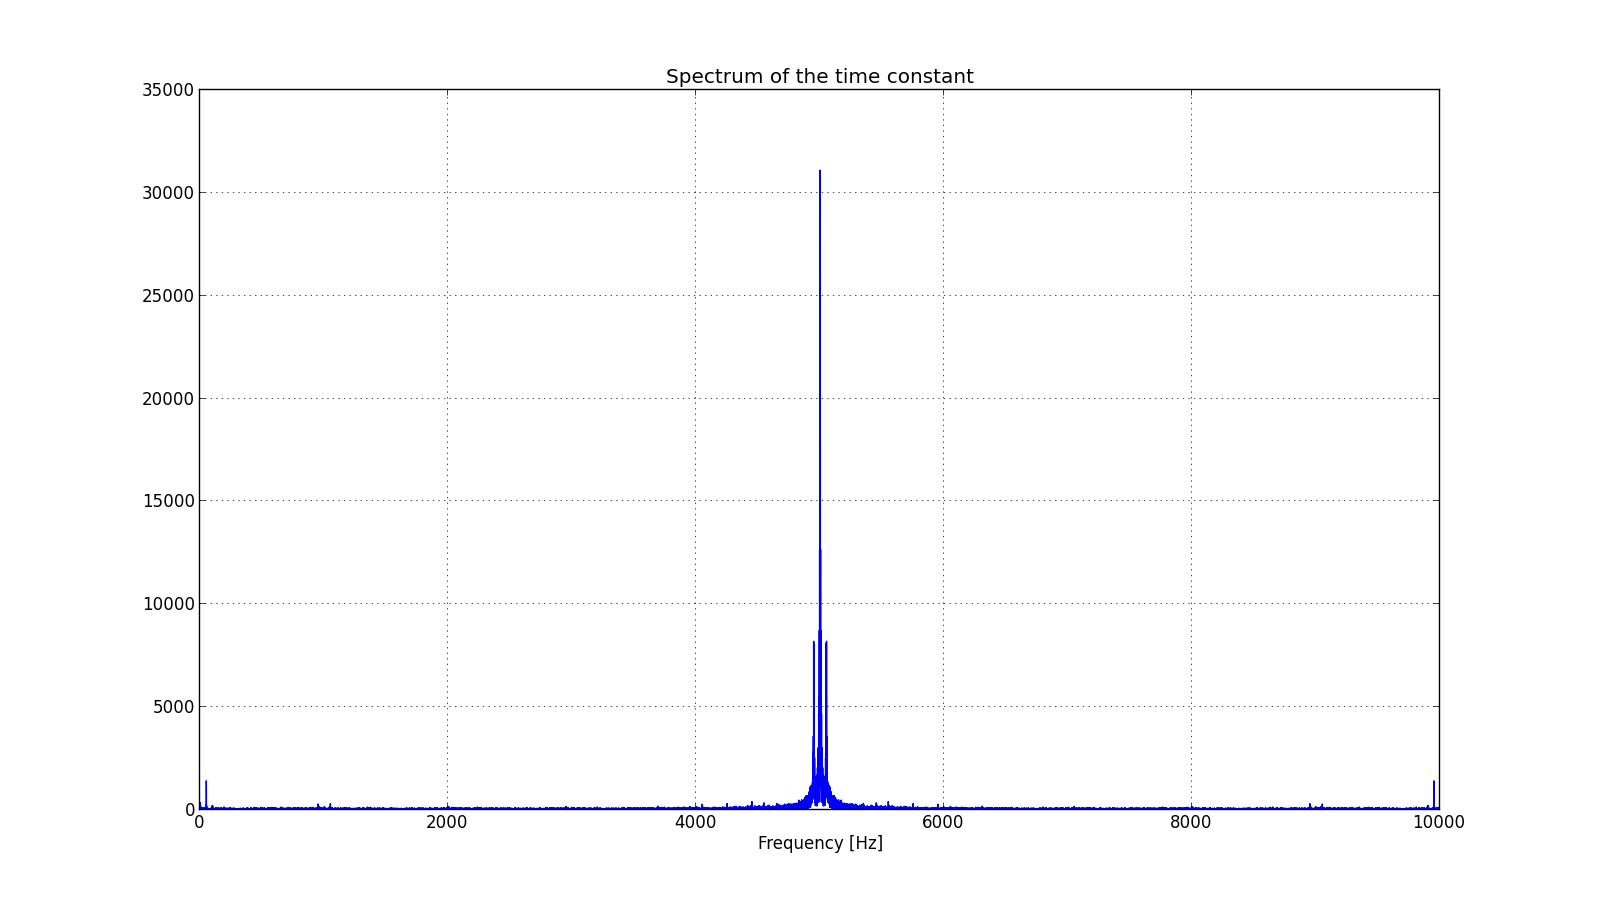 Time constant spectral analysis